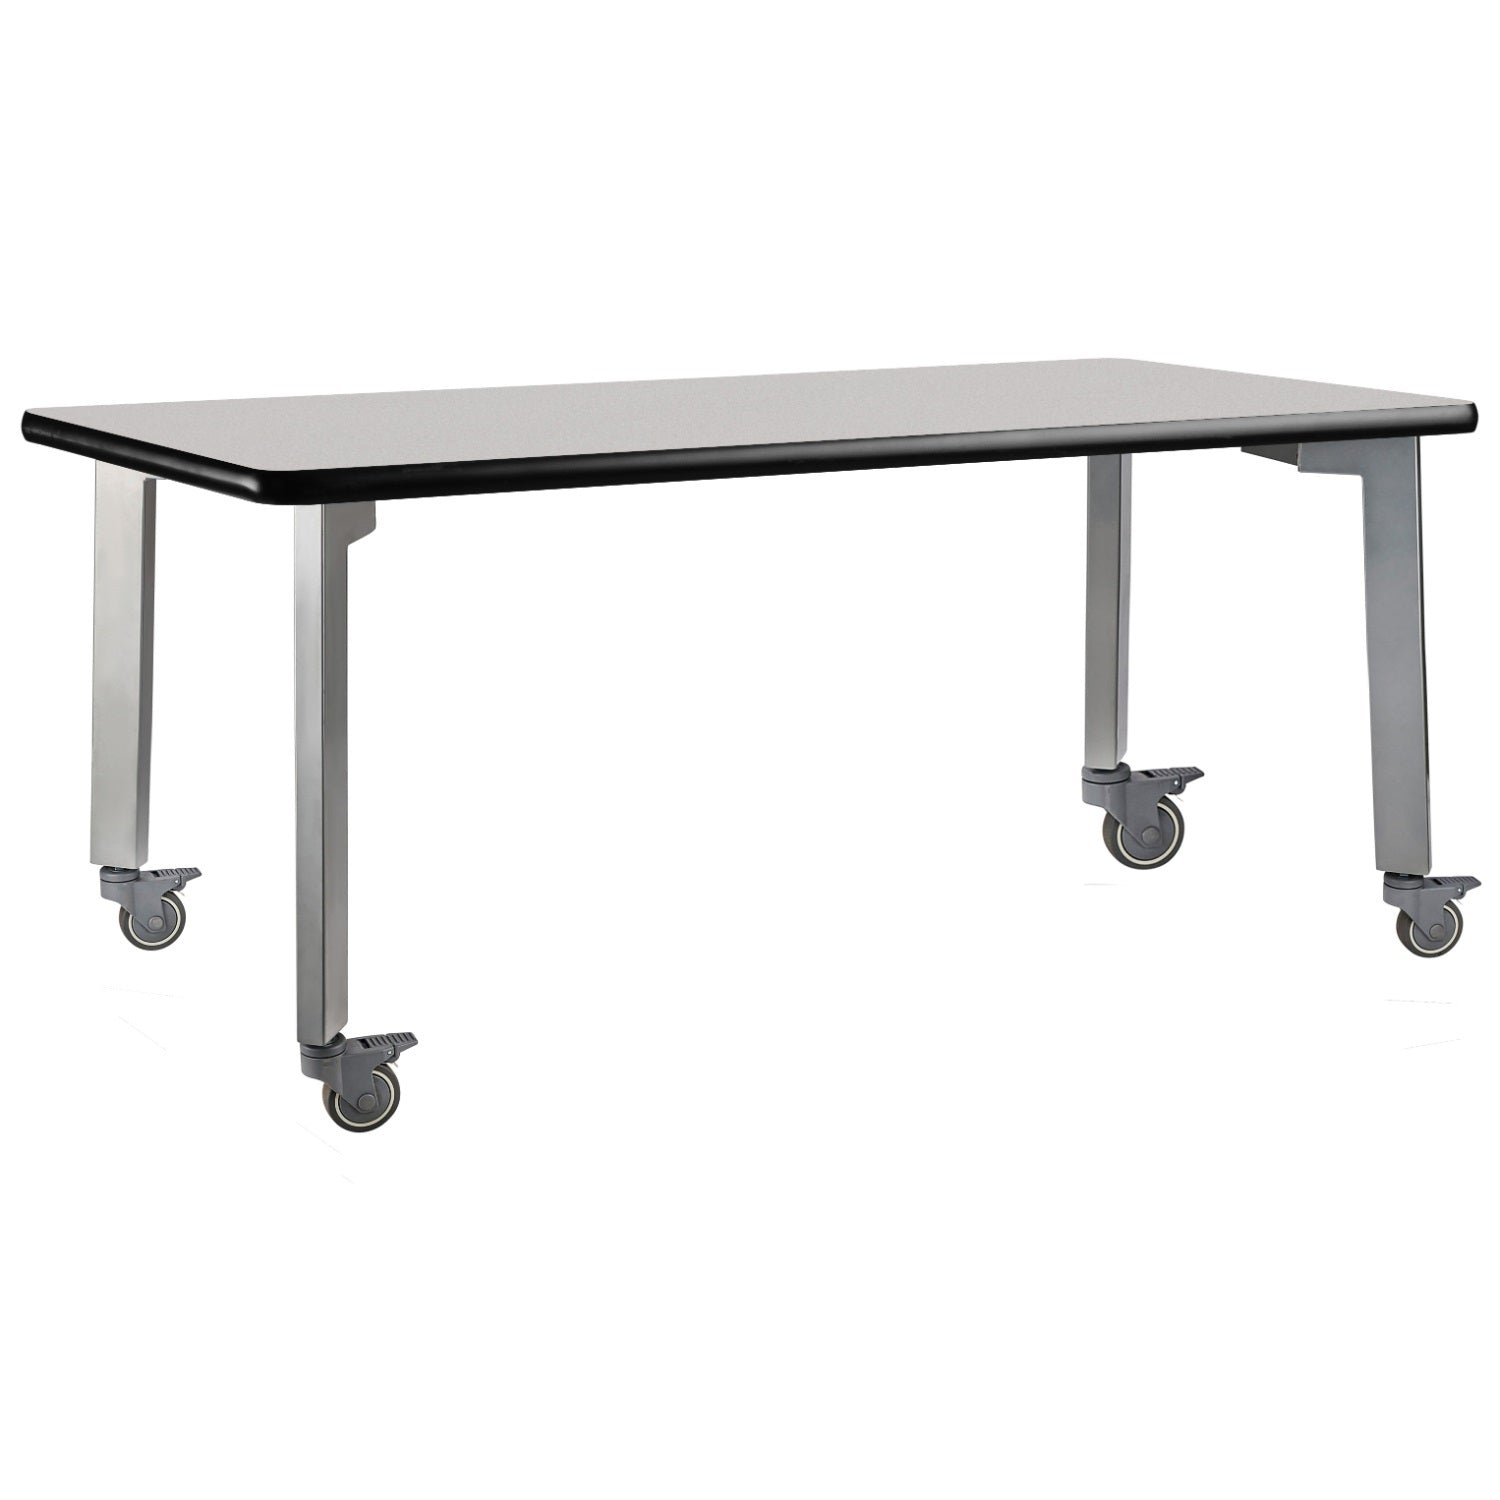 Titan Mobile Table, 36" x 54", Supreme High Pressure Laminate Top with MDF Core and ProtectEdge